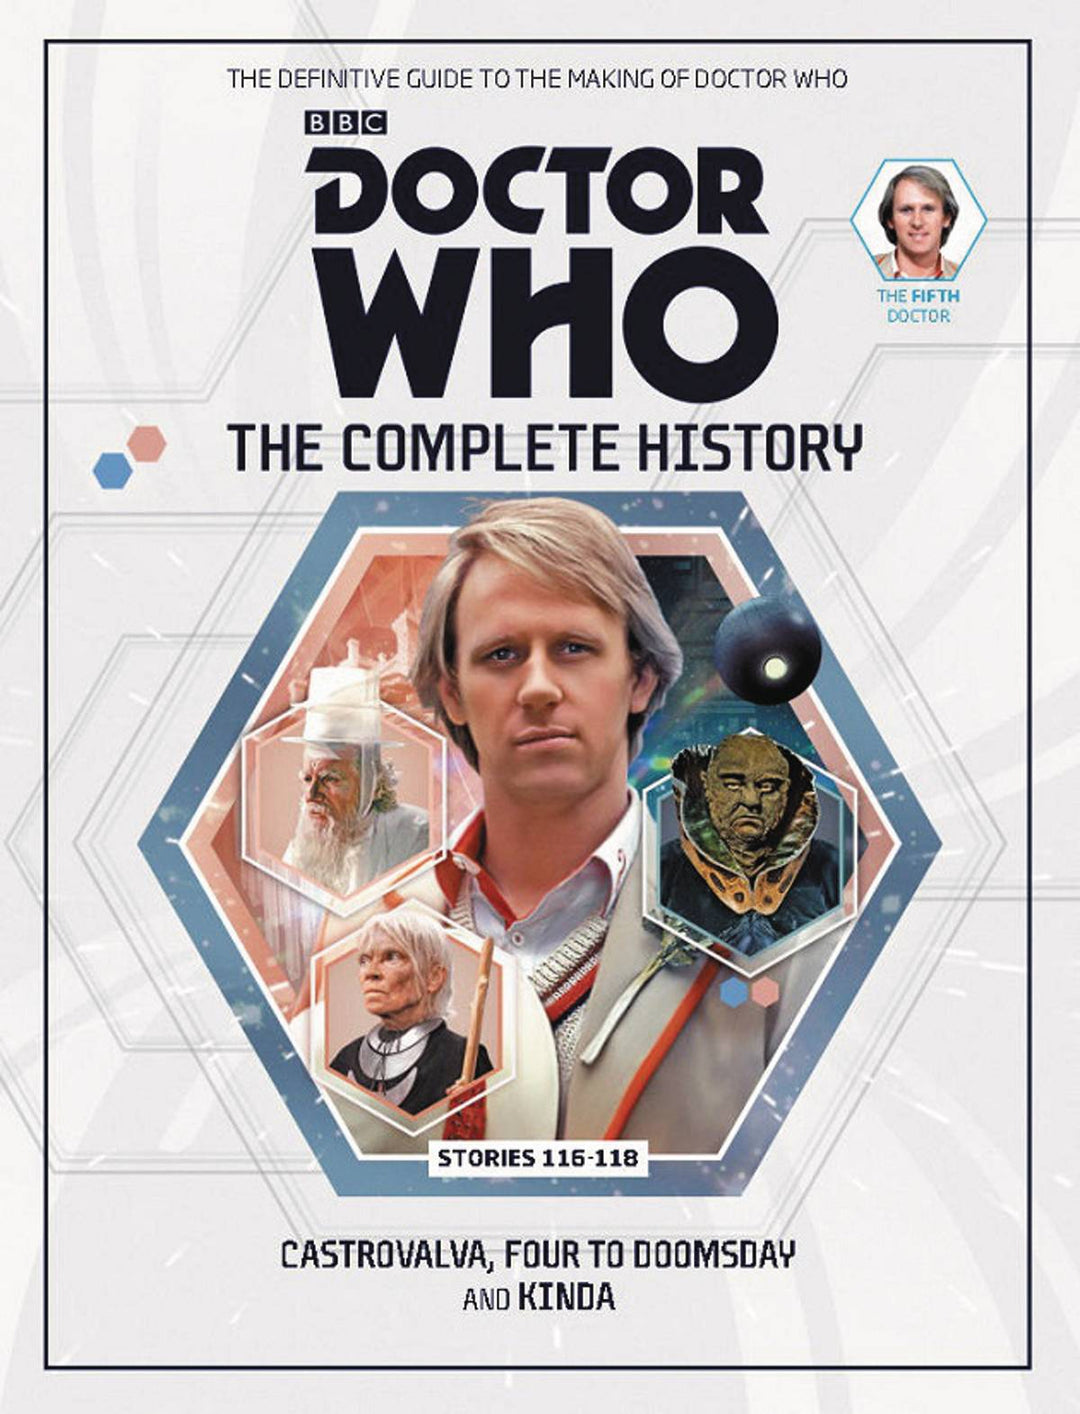 Doctor Who Comp Hist Hardcover Volume 23 5TH Doctor Stories 116 - 118